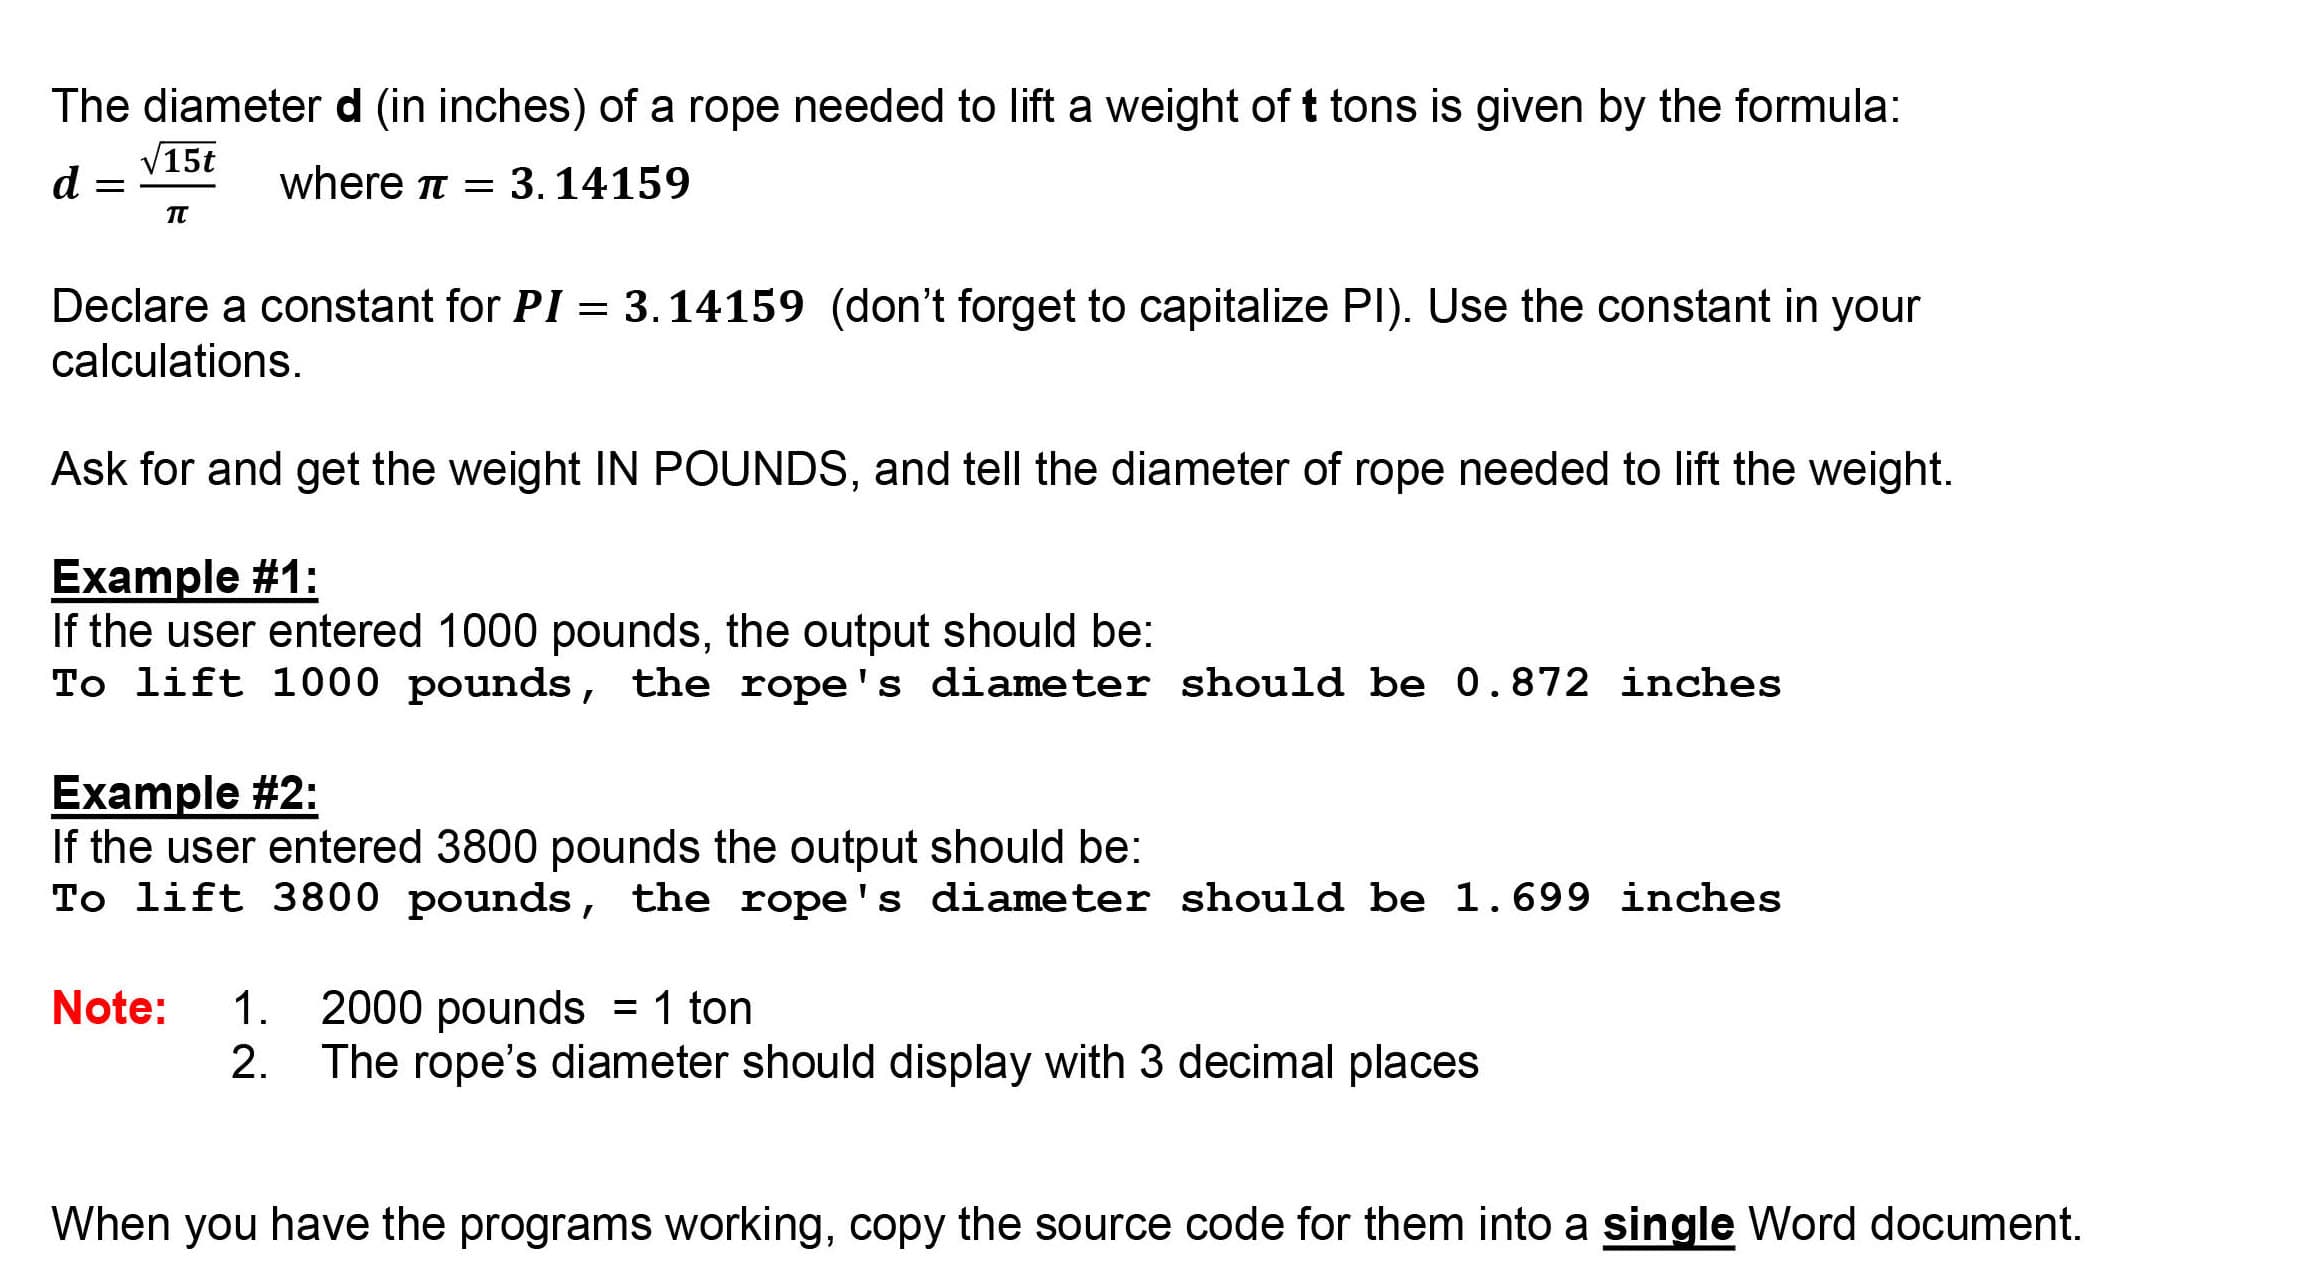 The diameterd (in inches) of a rope needed to lift a weight of t tons is given by the formula:
V15t
d
where t = 3. 14159
Declare a constant for PI = 3.14159 (don't forget to capitalize PI). Use the constant in your
calculations.
%3D
Ask for and get the weight IN POUNDS, and tell the diameter of rope needed to lift the weight.
Example #1:
If the user entered 1000 pounds, the output should be:
To lift 1000 pounds, the rope's diameter should be 0.872 inches
Example #2:
If the user entered 3800 pounds the output should be:
To lift 3800 pounds, the rope's diameter should be 1.699 inches
Note:
1. 2000 pounds = 1 ton
2. The rope's diameter should display with 3 decimal places
